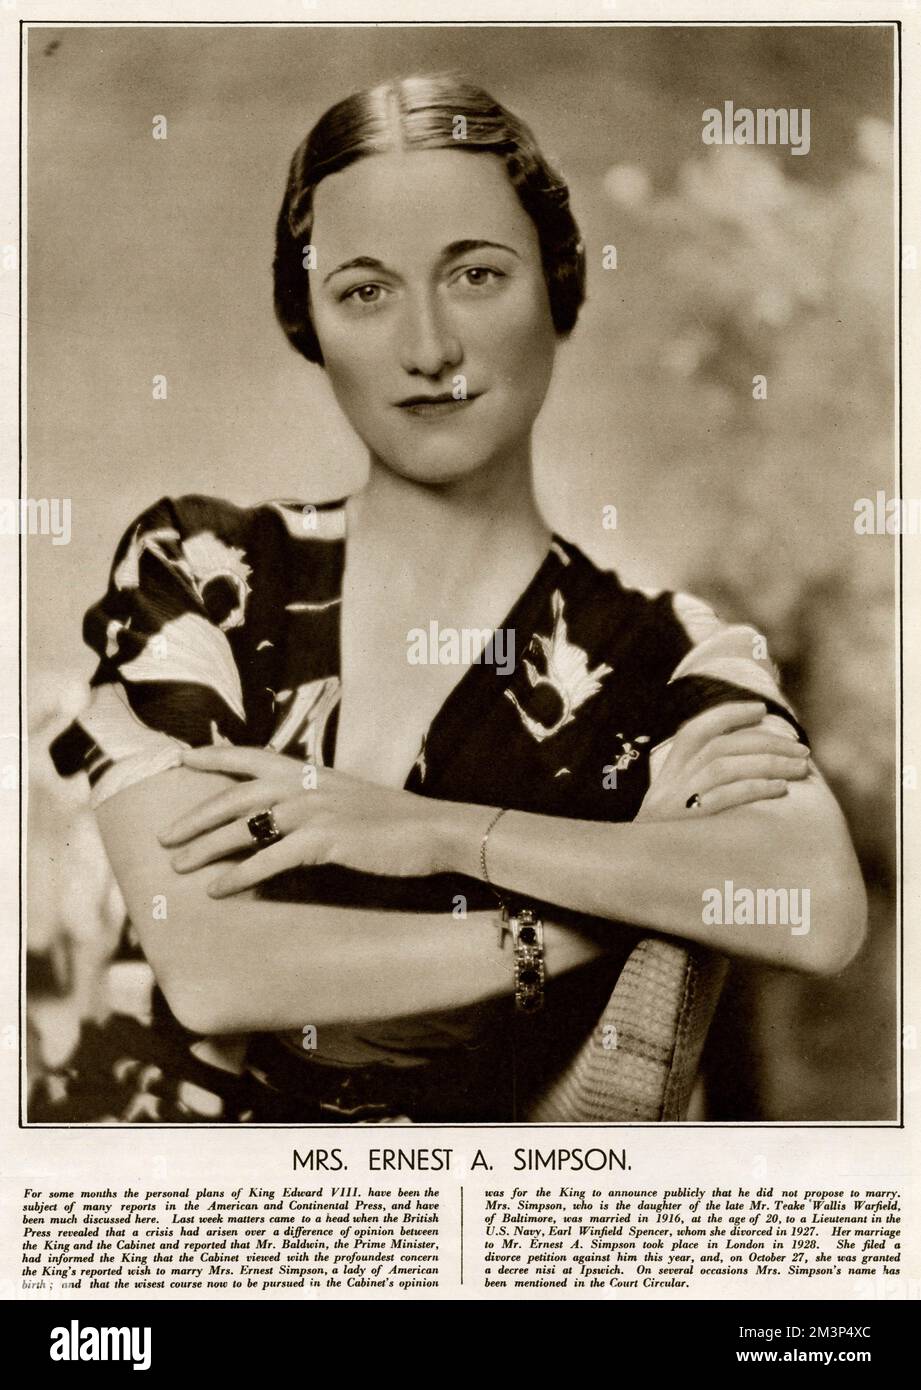 Mrs Ernest A. (Wallis) Simpson.  She had recently obtained a divorce, and her name was increasingly being connected with King Edward VIII.  She would eventually become the Duchess of Windsor when Edward abdicated the throne in order to marry her.  This edition of The Sketch is dated two days before the abdication.   1936 Stock Photo